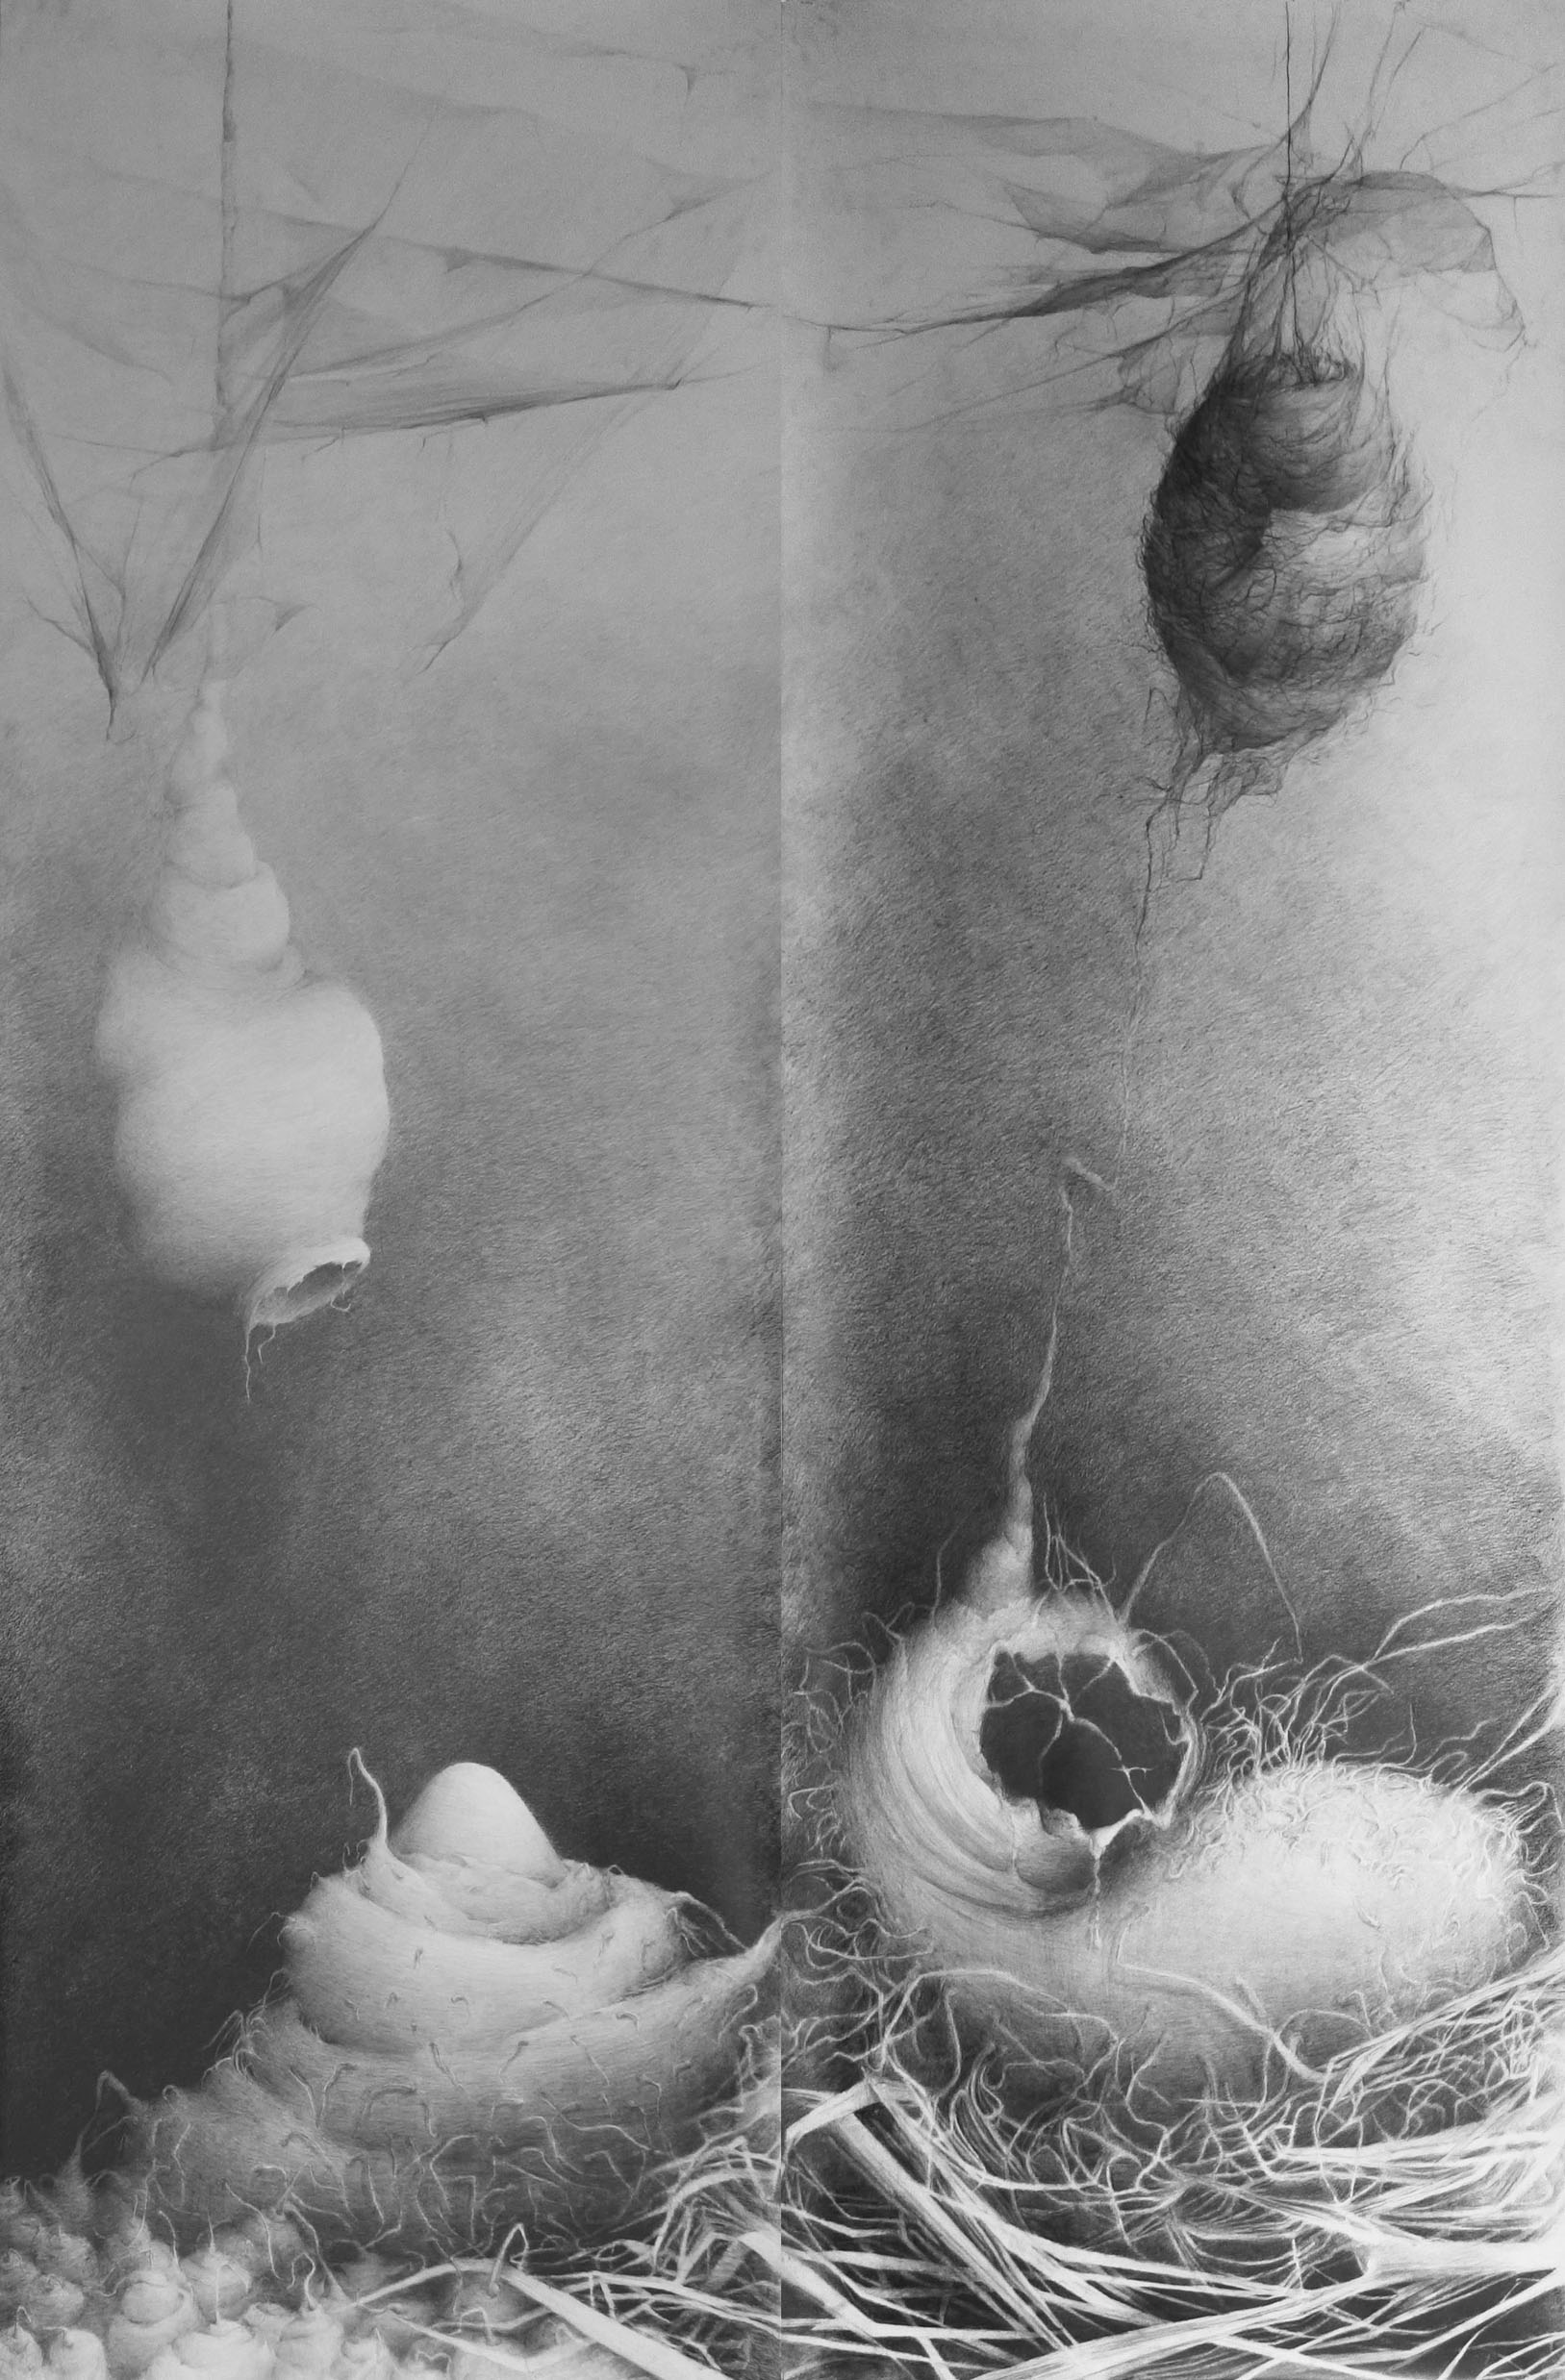 Links- pencil drawing about connections, depicting cocoons, by Joanna Klepadlo